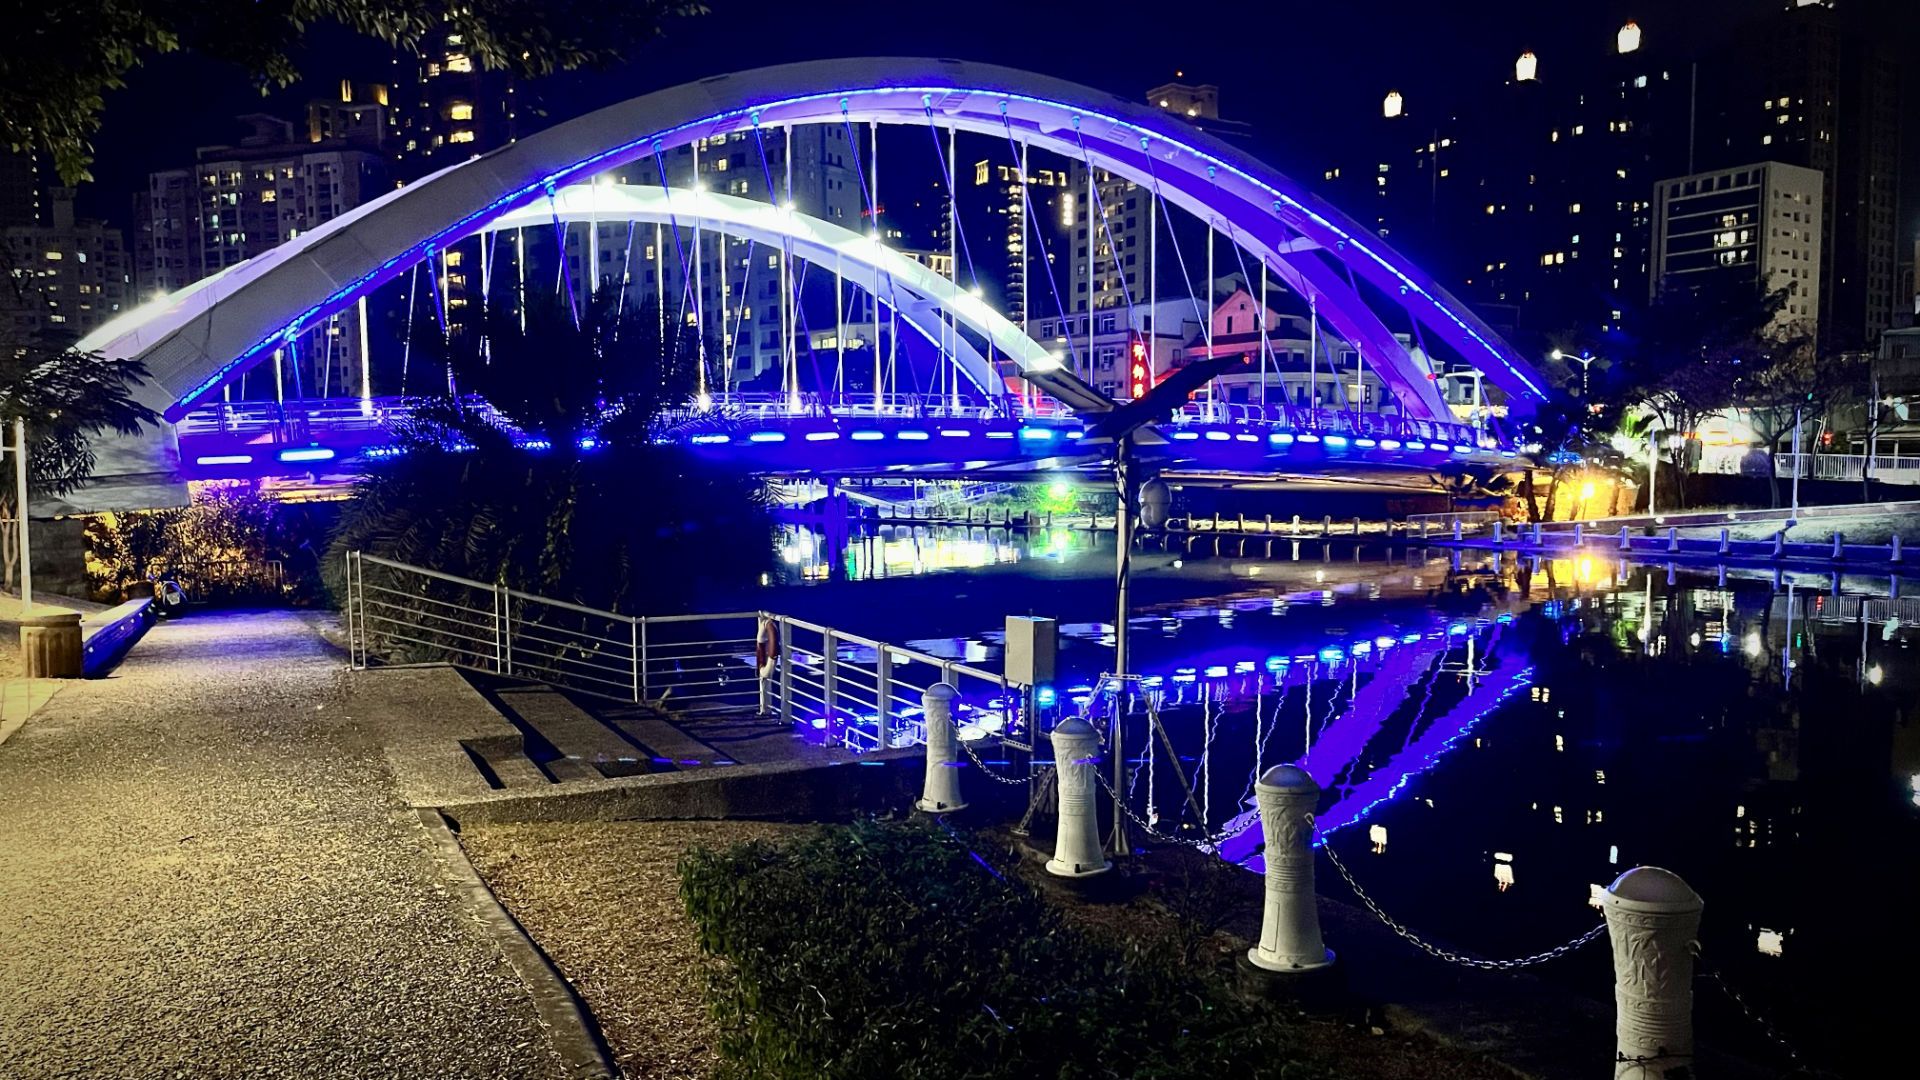 An arched road bridge across the river, illuminated in neon blue.